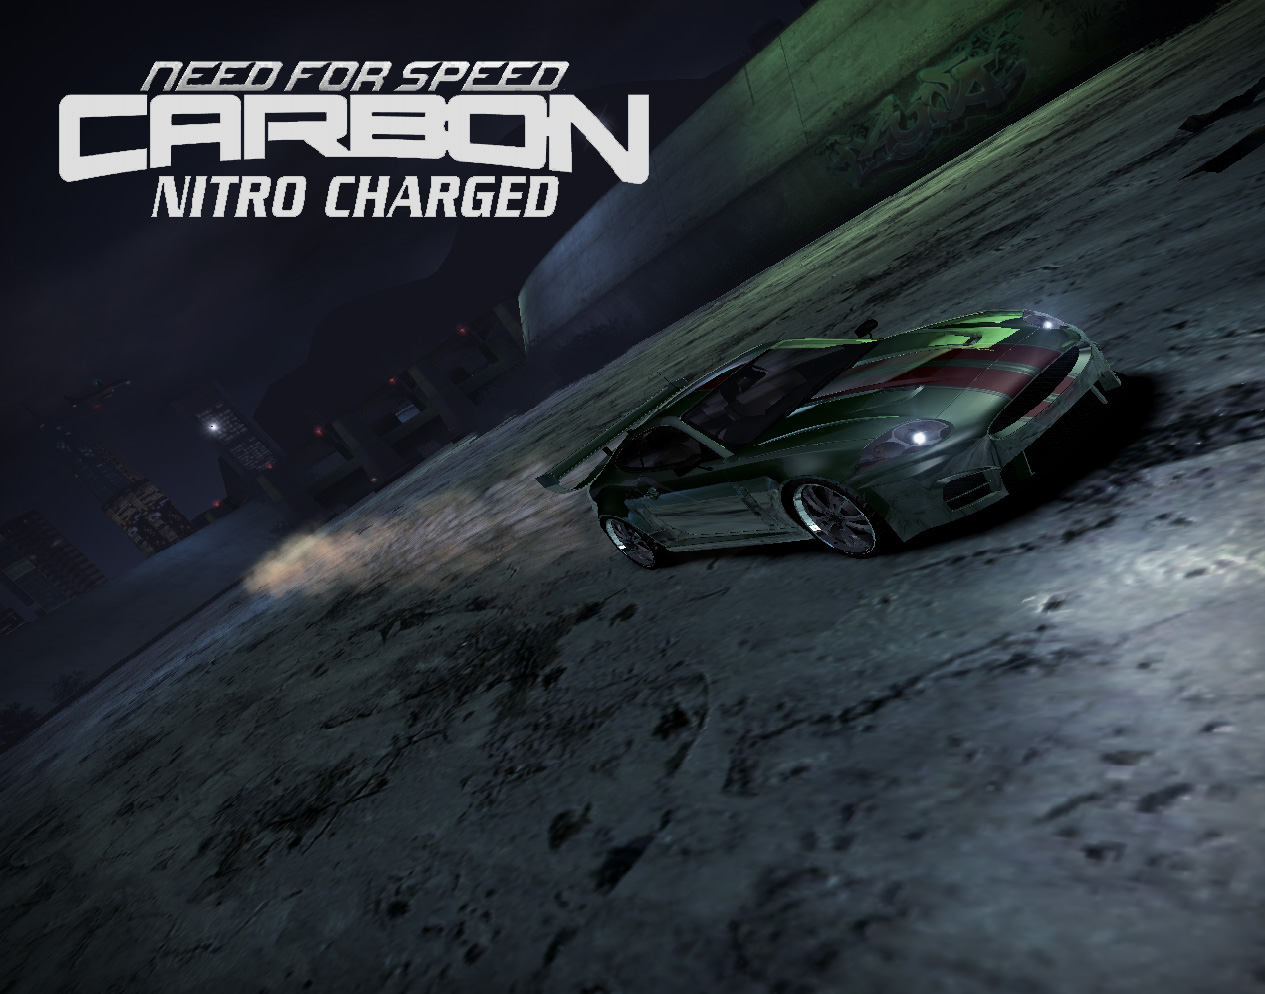 Need for Speed Carbon Nitro Charged wallpaper 1 by Rainbow-Dash-Rockz